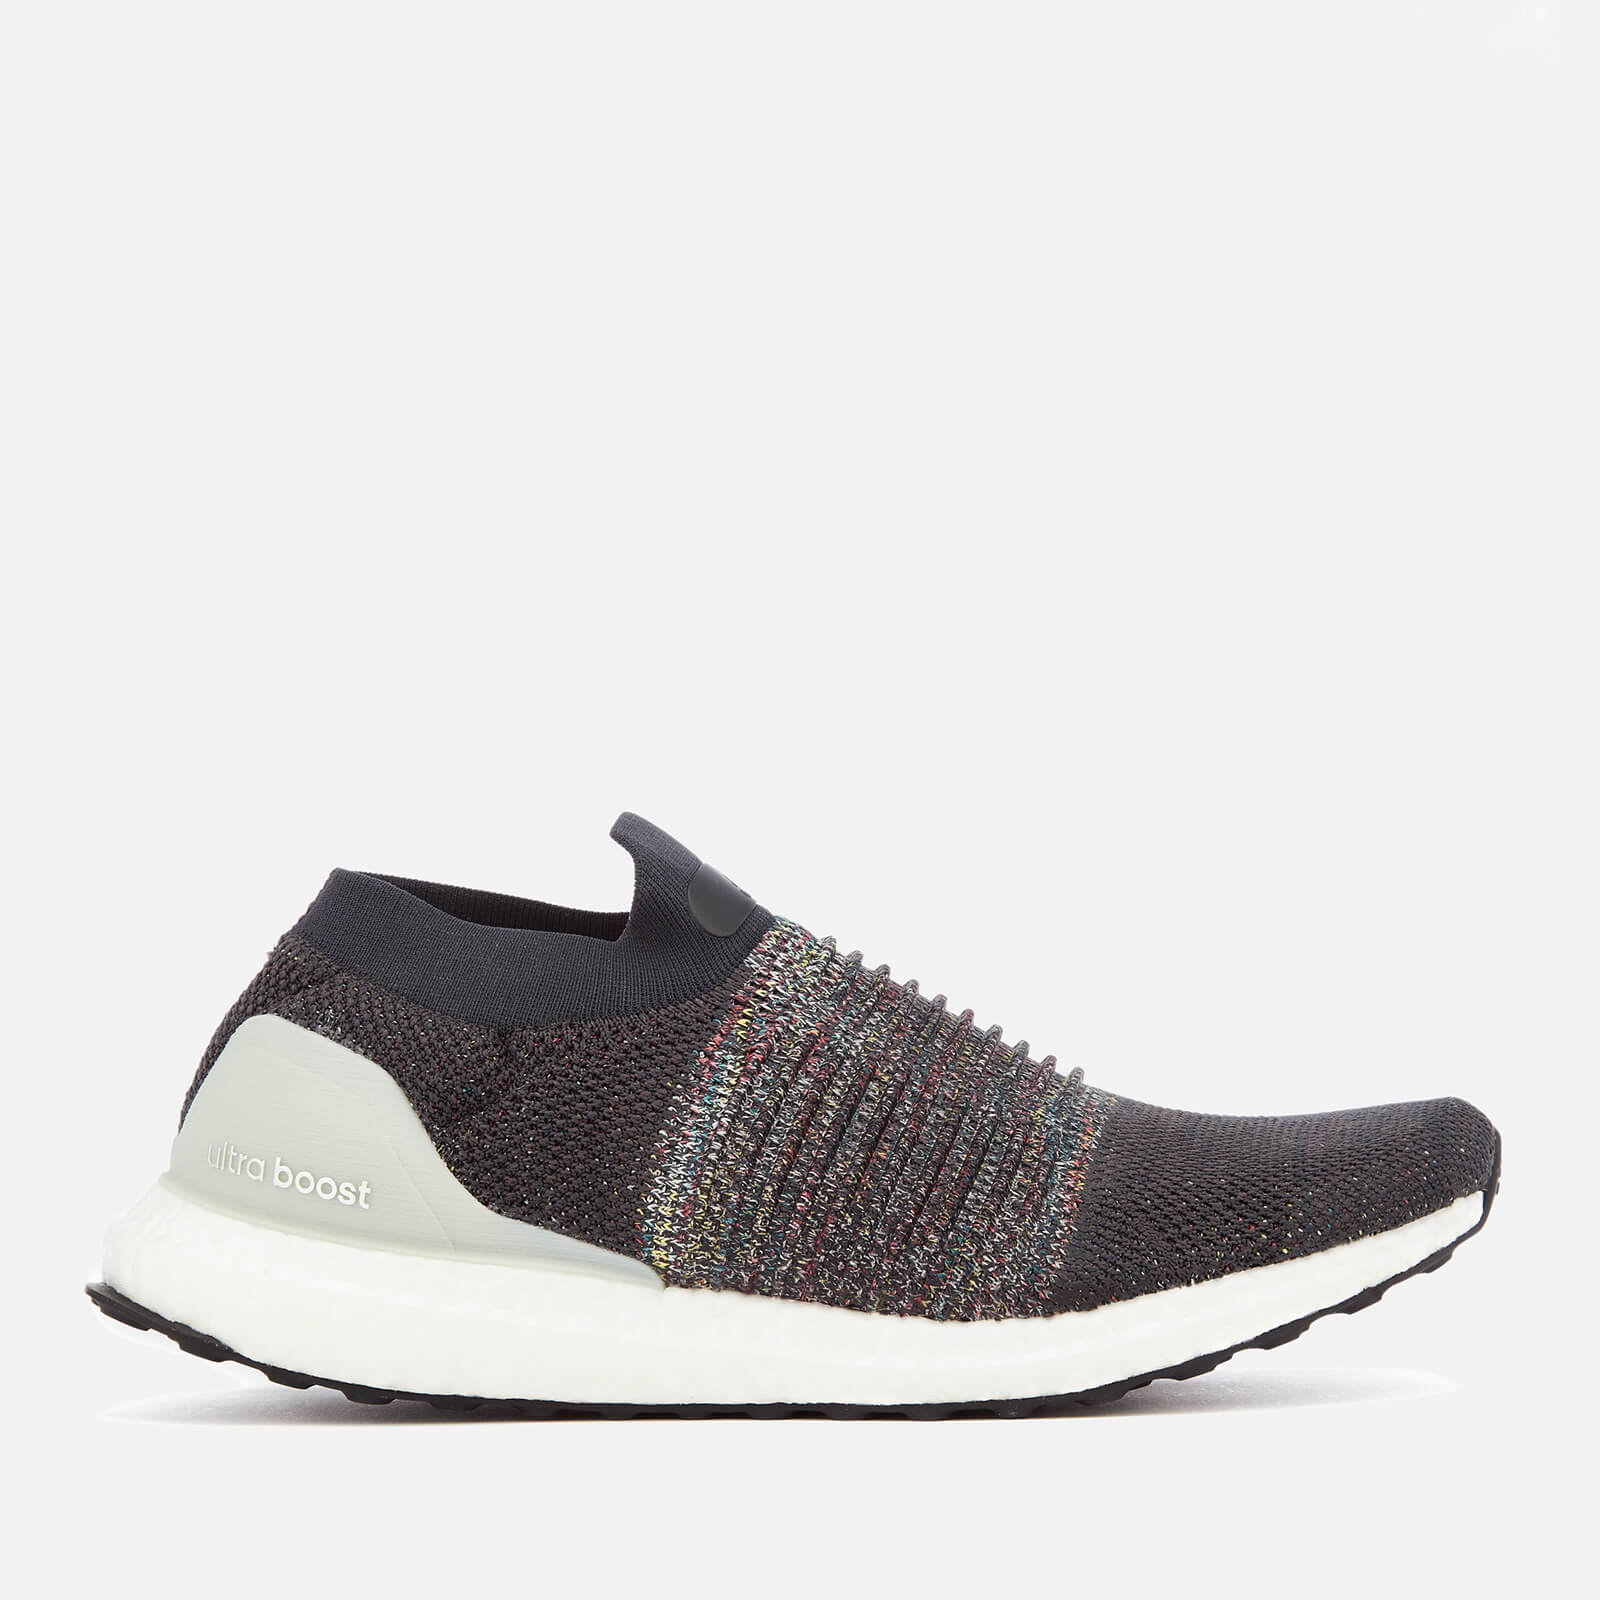 Ultraboost Laceless Trainers - Carbon 